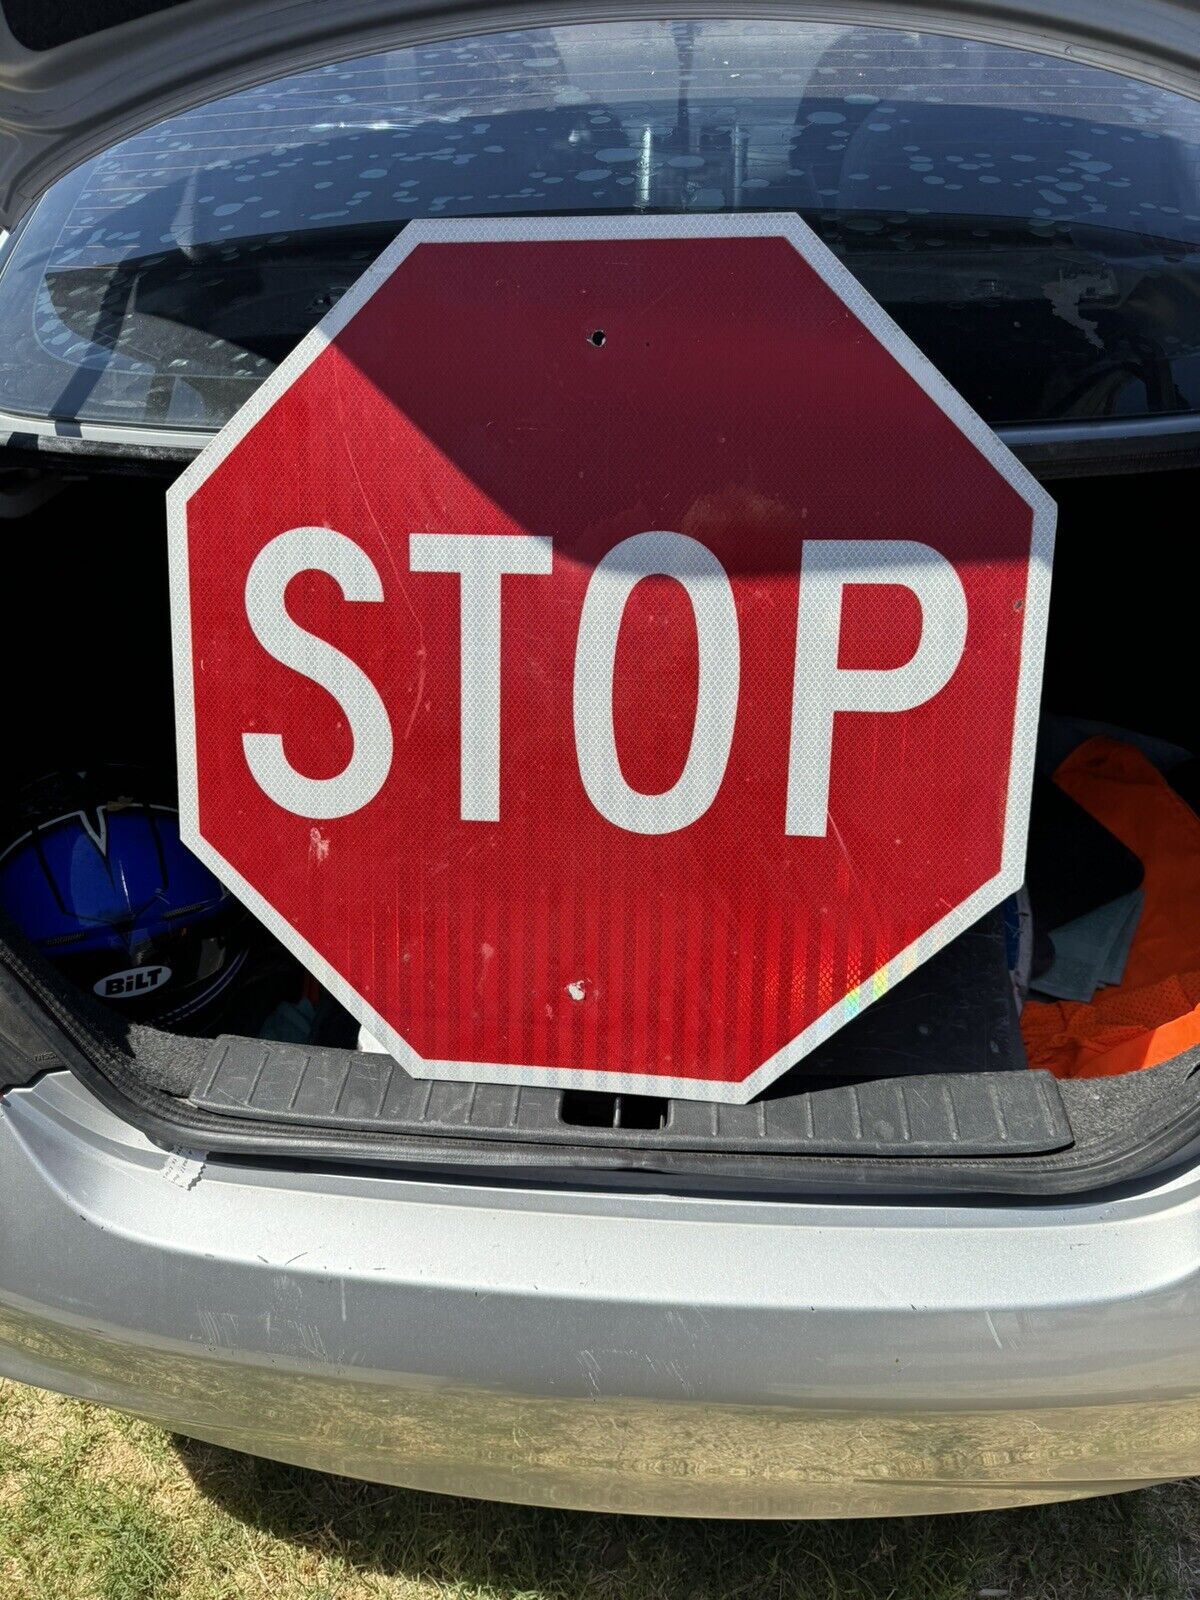 Street road Sign Used. “Stop”.   24” x 24”